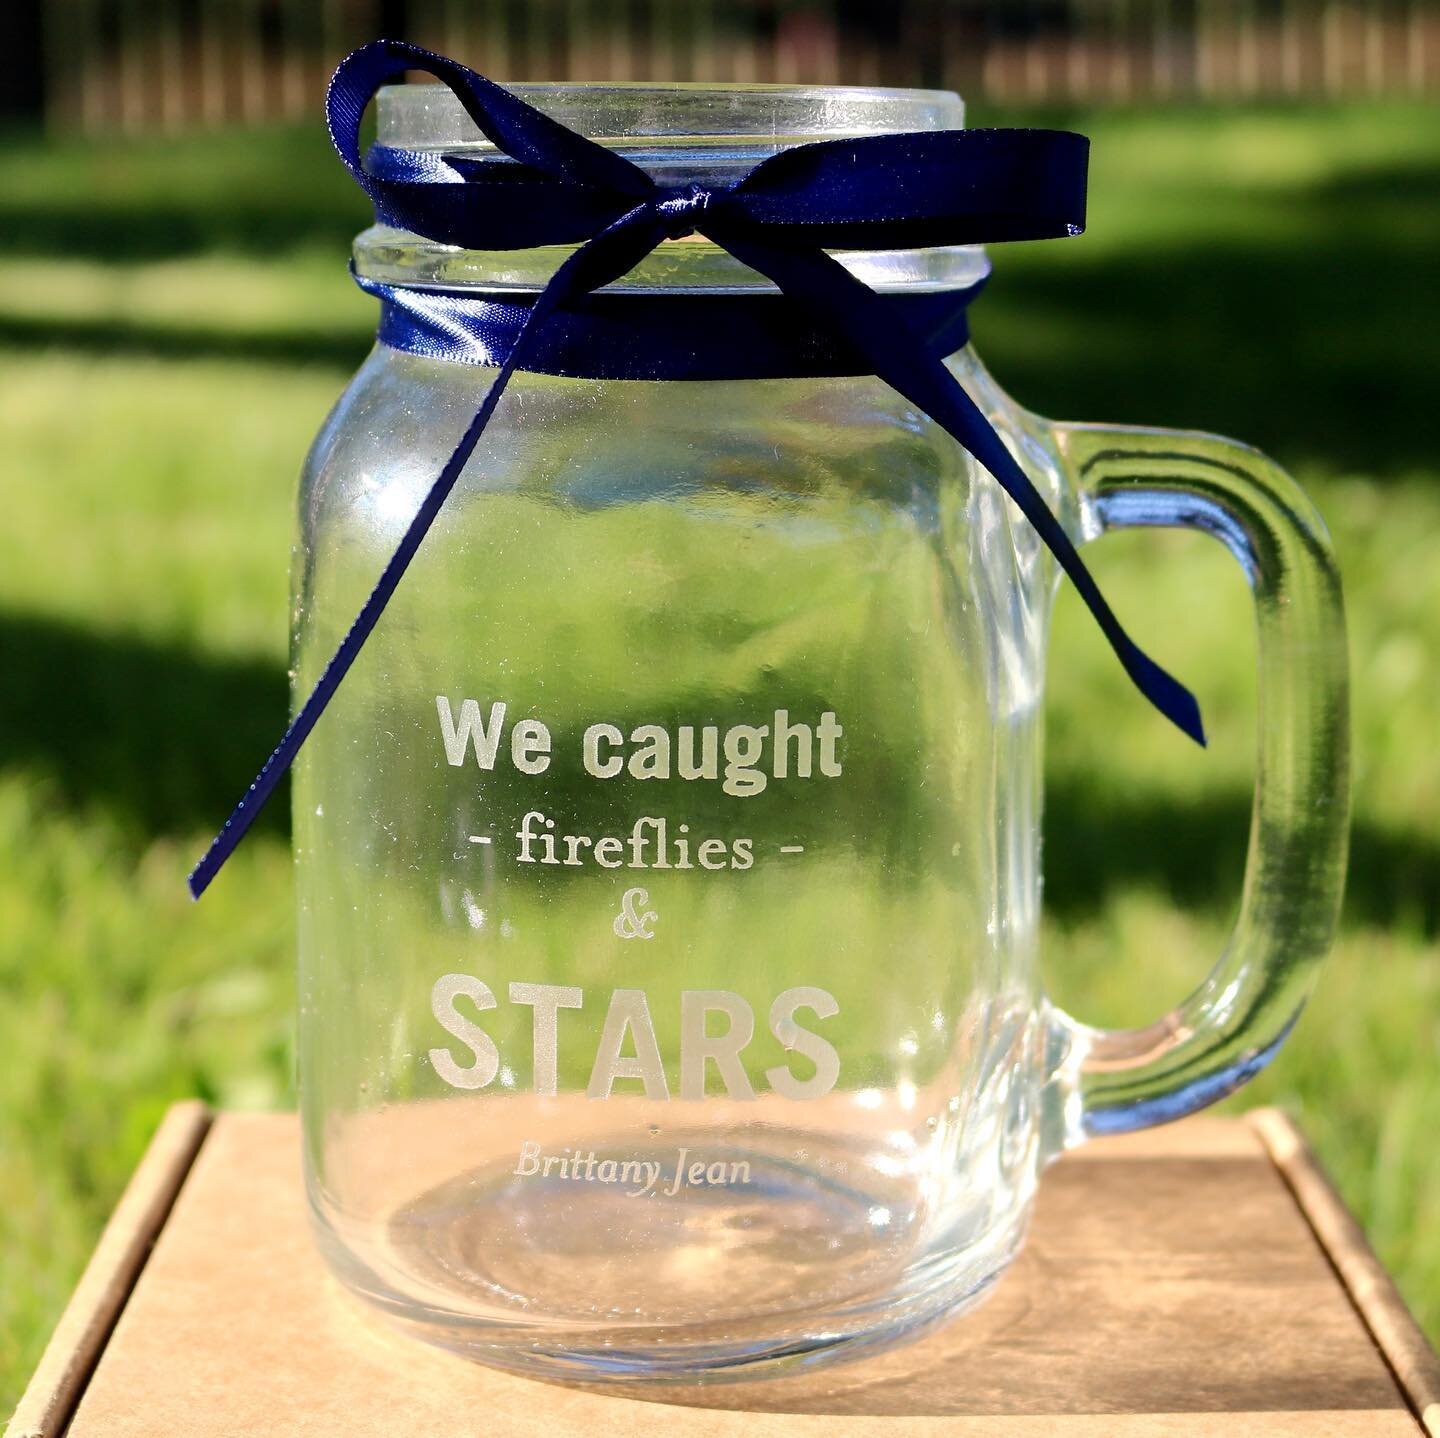 GIVEAWAY! ☀️

To celebrate the last days of a golden summer...

This is the very last mason jar (with lyrics from He Gave Me the Sea - &quot;In a mason jar we caught fireflies and stars...&quot;), and I'd love to give it to one of you! 

How to enter